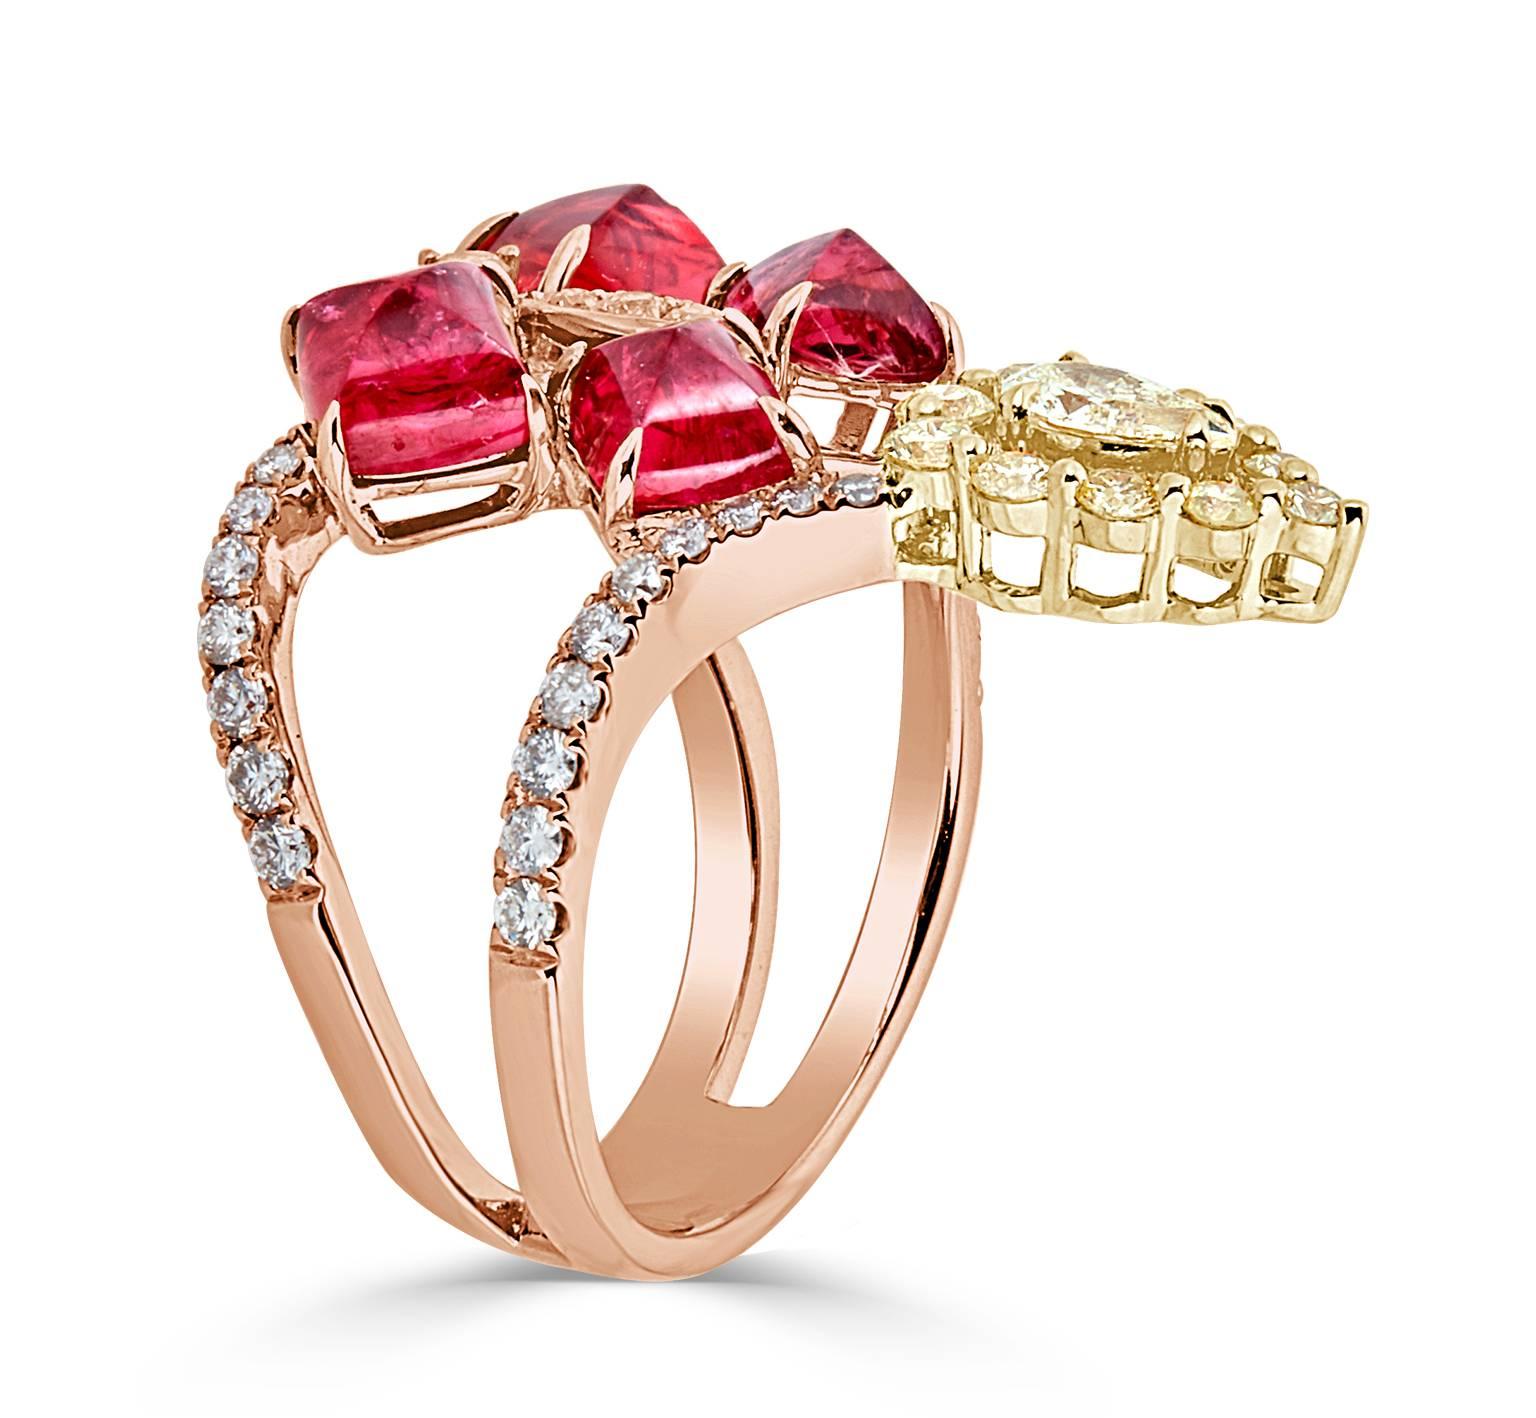 This delicate, yet powerful red spinel and yellow diamond and white diamond accents ring is magnificent.  It will shimmer on any finger you decide to wear it on; ring, middle or index and with the pear shaped yellow diamond pointing down or up, the